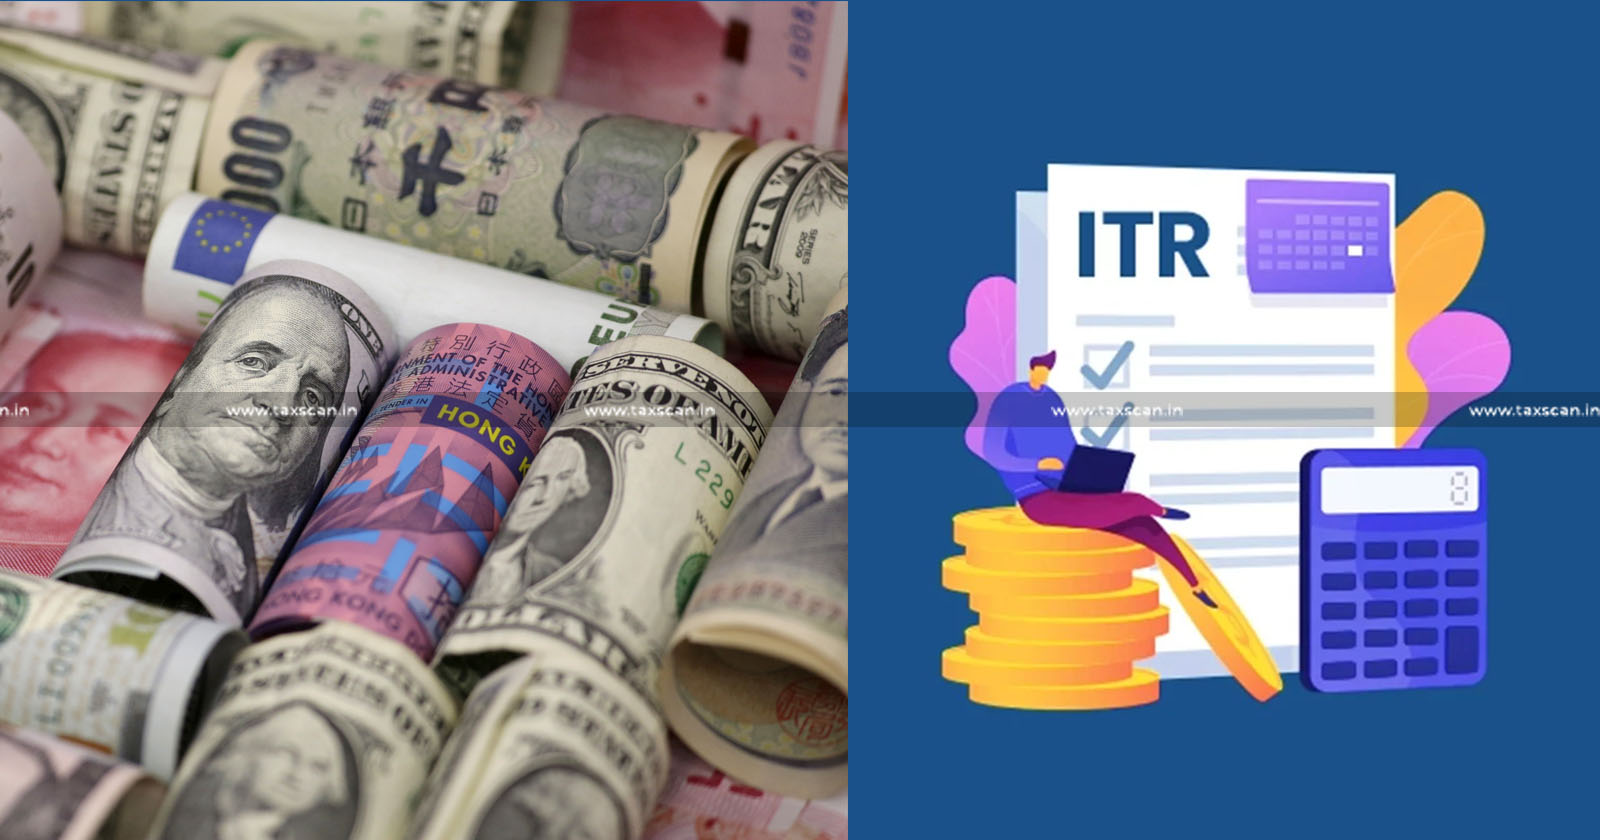 ITR Filing and Disclosure - Assets - Income - ITR Filing - Foreign Bank Accounts - Taxscan